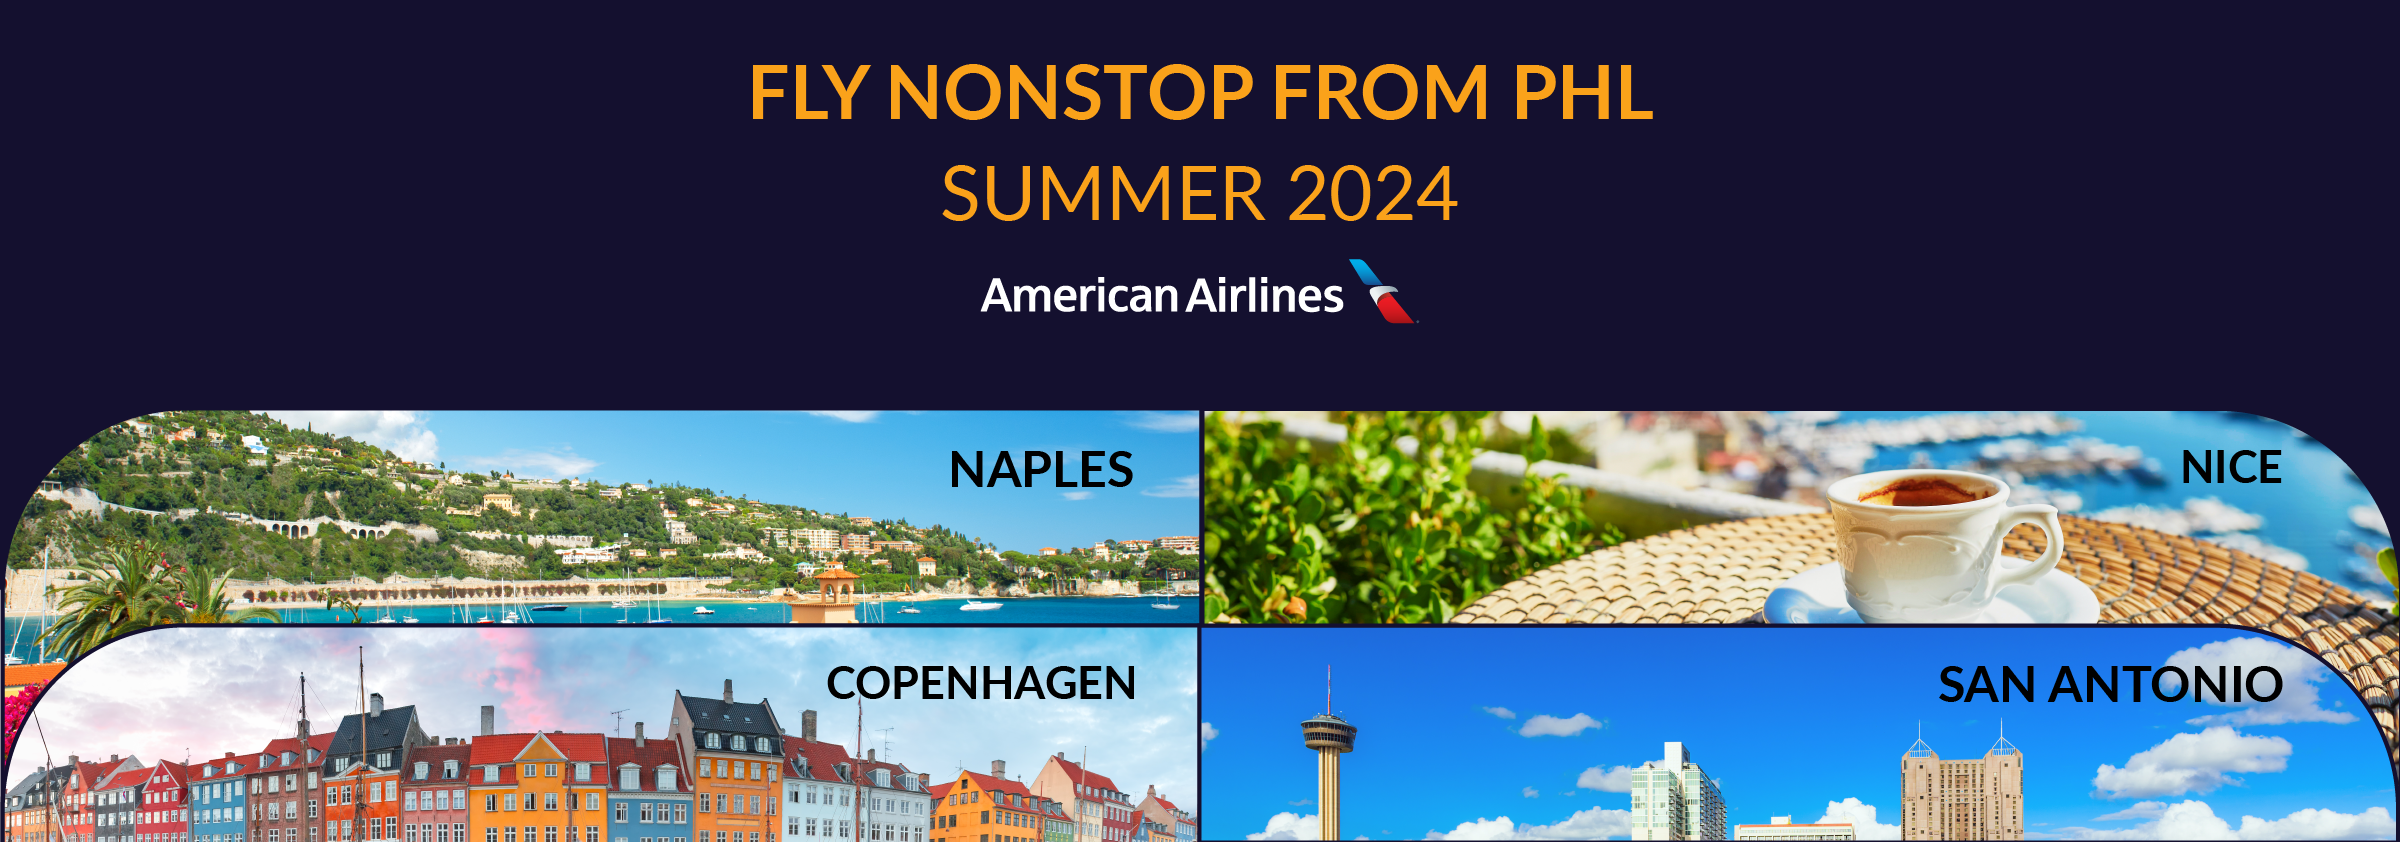 Fly nonstop American Airlines Summer 2024